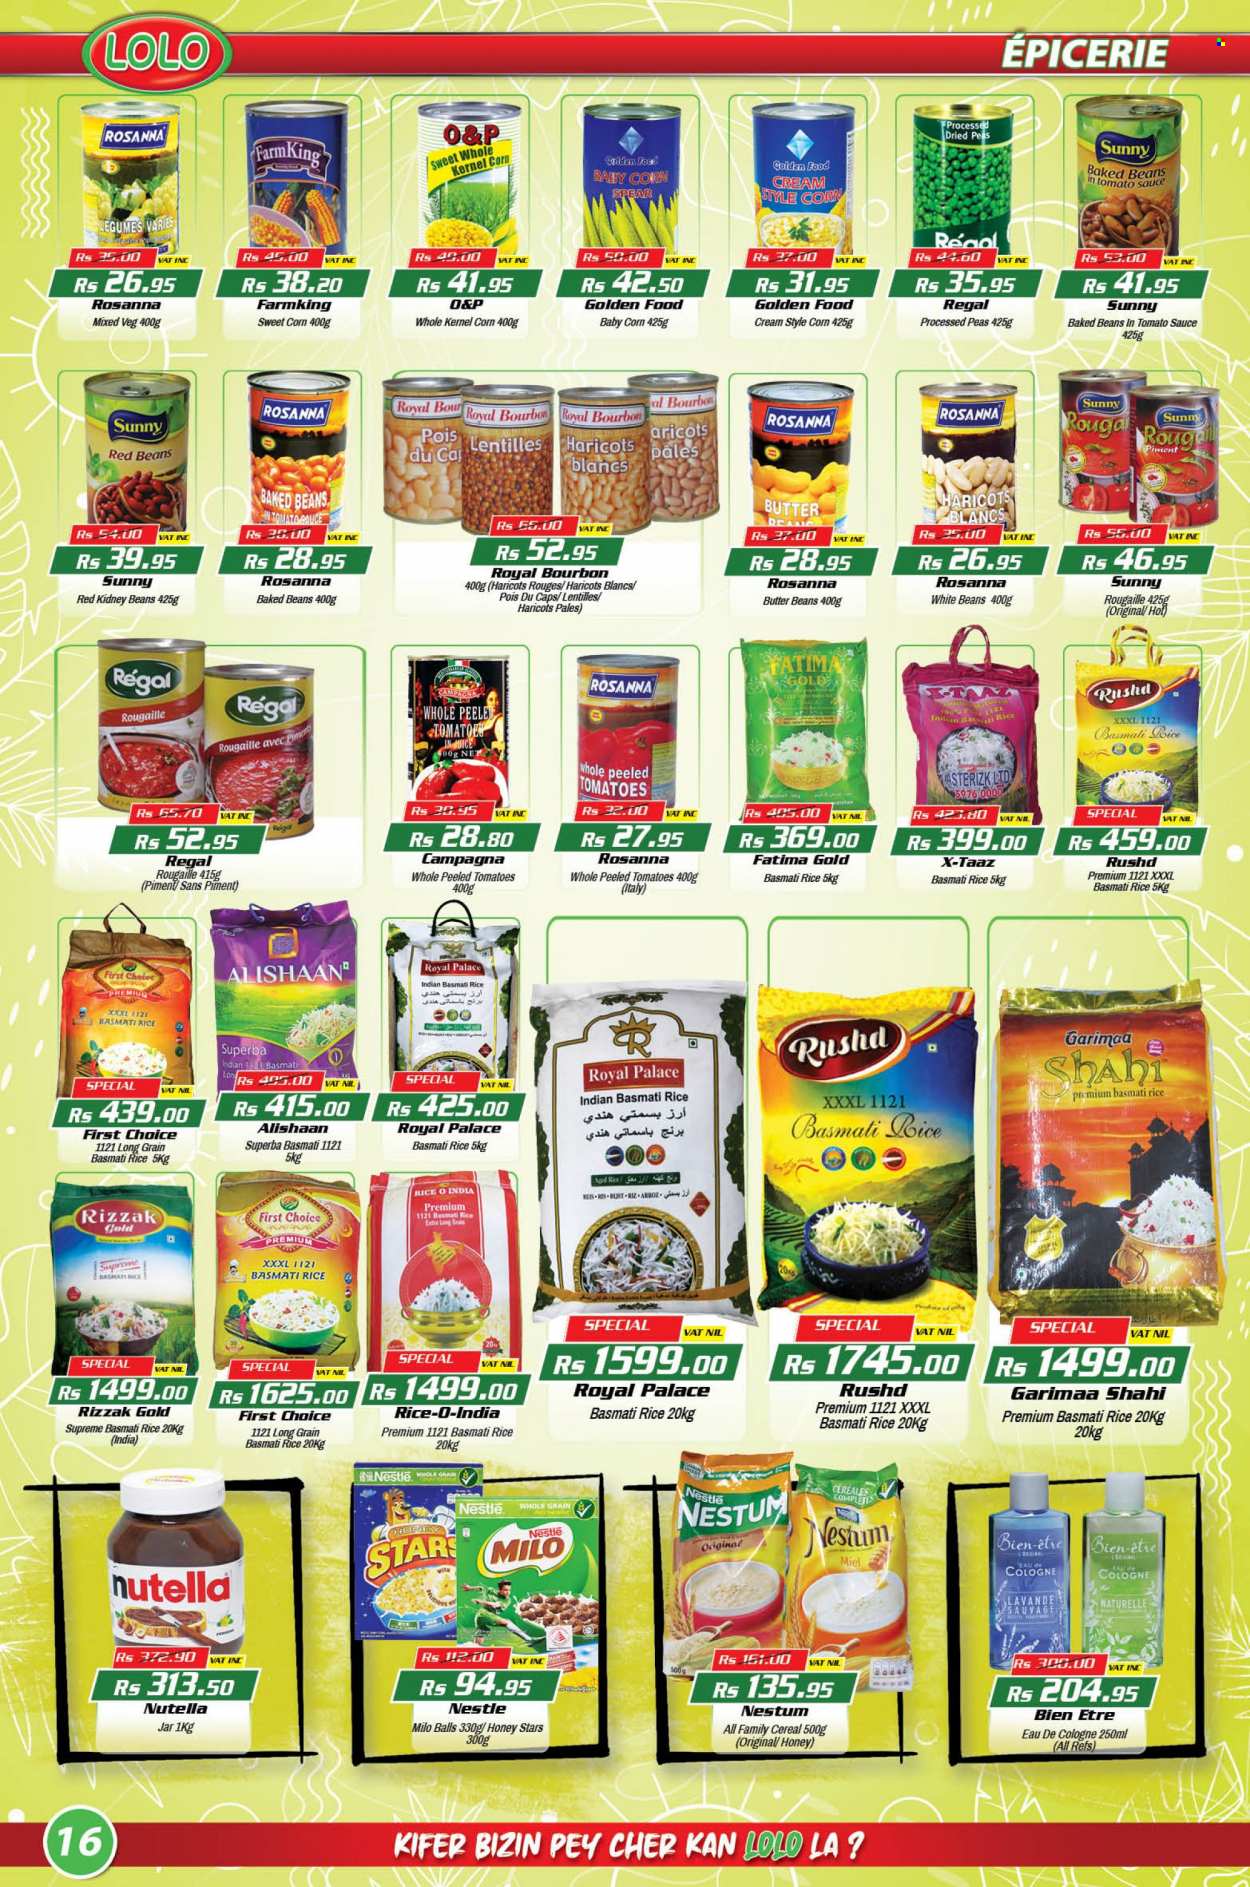 thumbnail - LOLO Hyper Catalogue - 26.08.2022 - 15.09.2022 - Sales products - beans, tomatoes, peas, sweet corn, Milo, butter, red beans, kidney beans, baked beans, cereals, basmati rice, rice, honey, juice, bourbon, cologne, jar, cap, Nestlé, Nutella. Page 16.